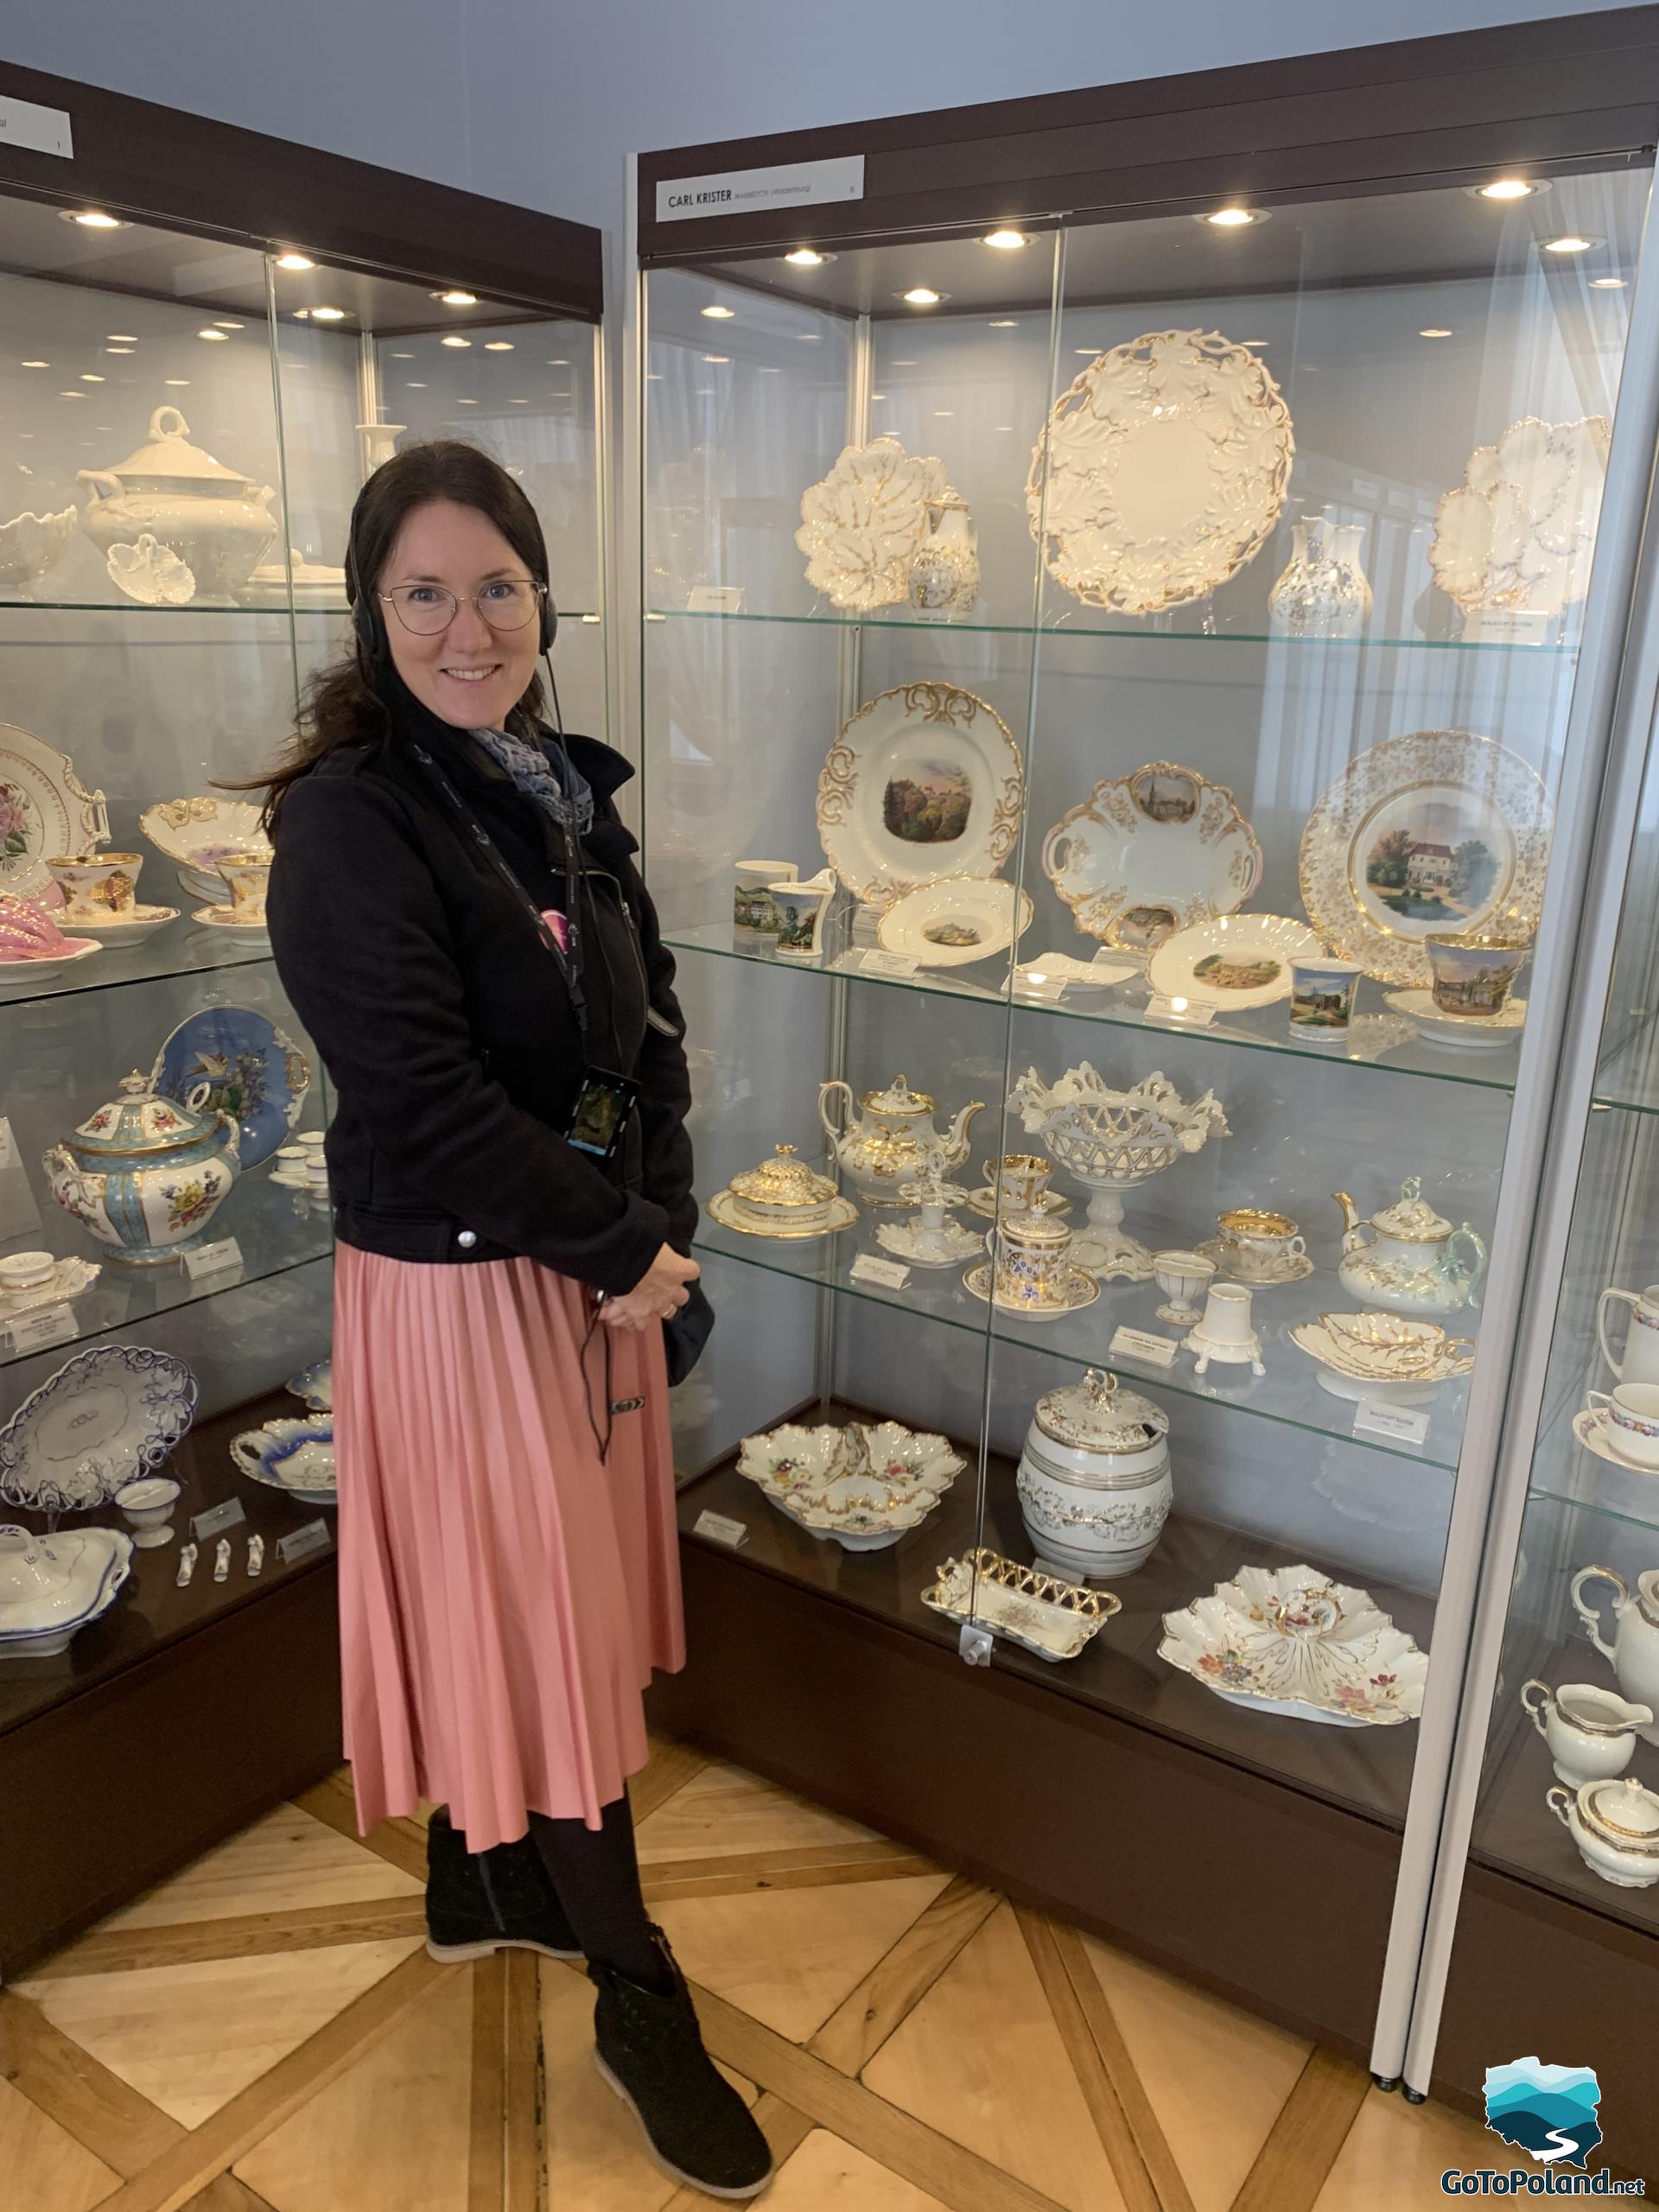 a woman is standing in front of a display case with porcelain objects